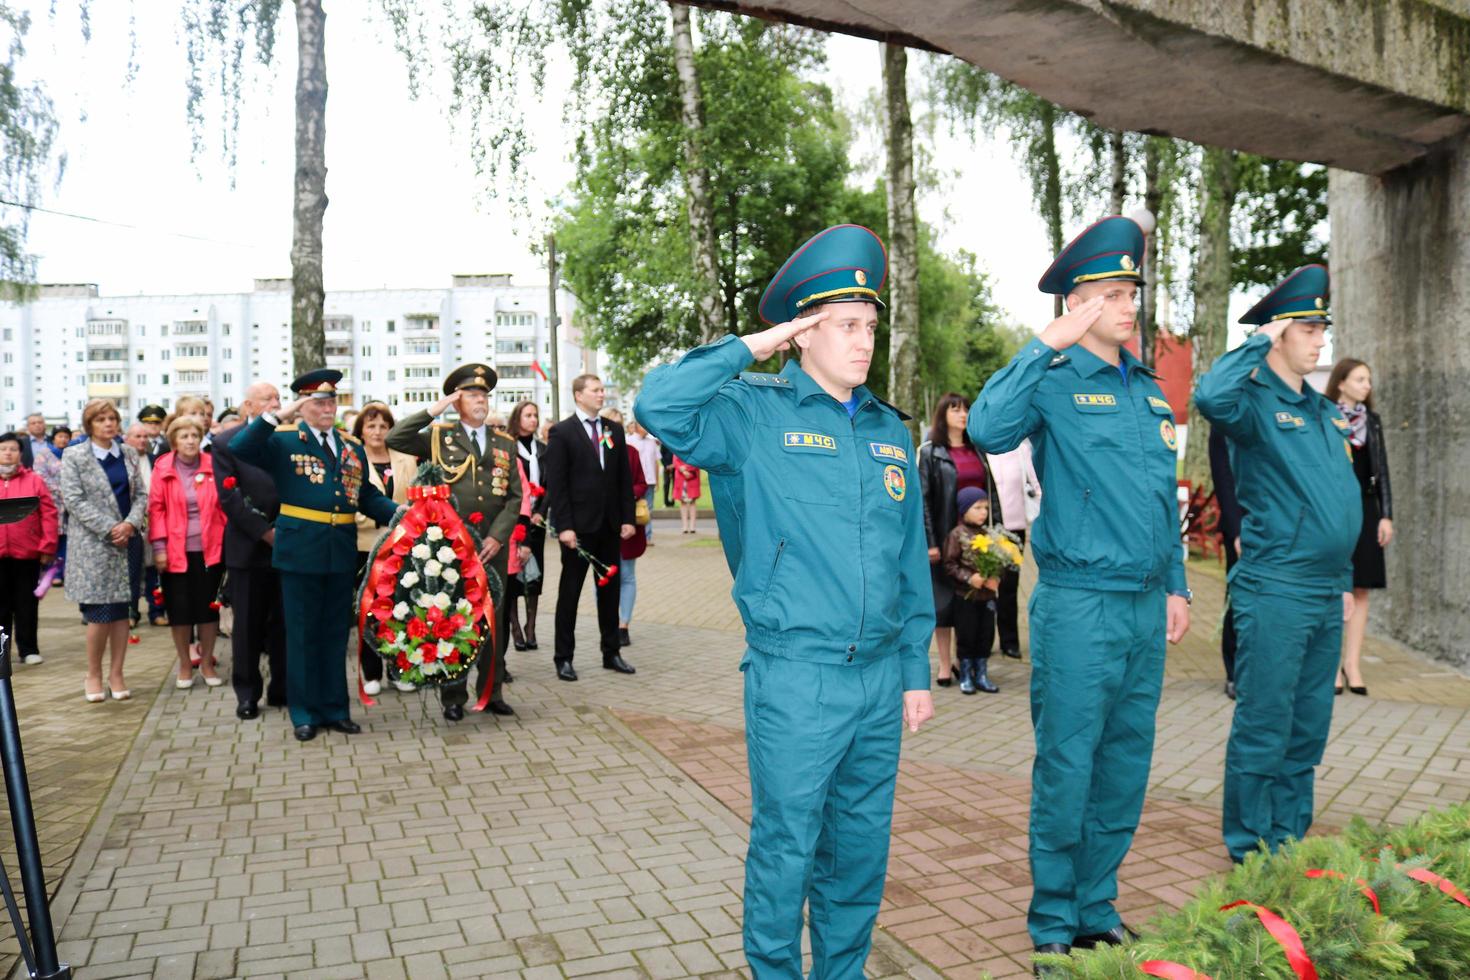 Men military and old man grandfather veteran of the Second World War in medals and decorations give honor show respect for the day of victory Moscow, Russia, 05.09.2018. photo